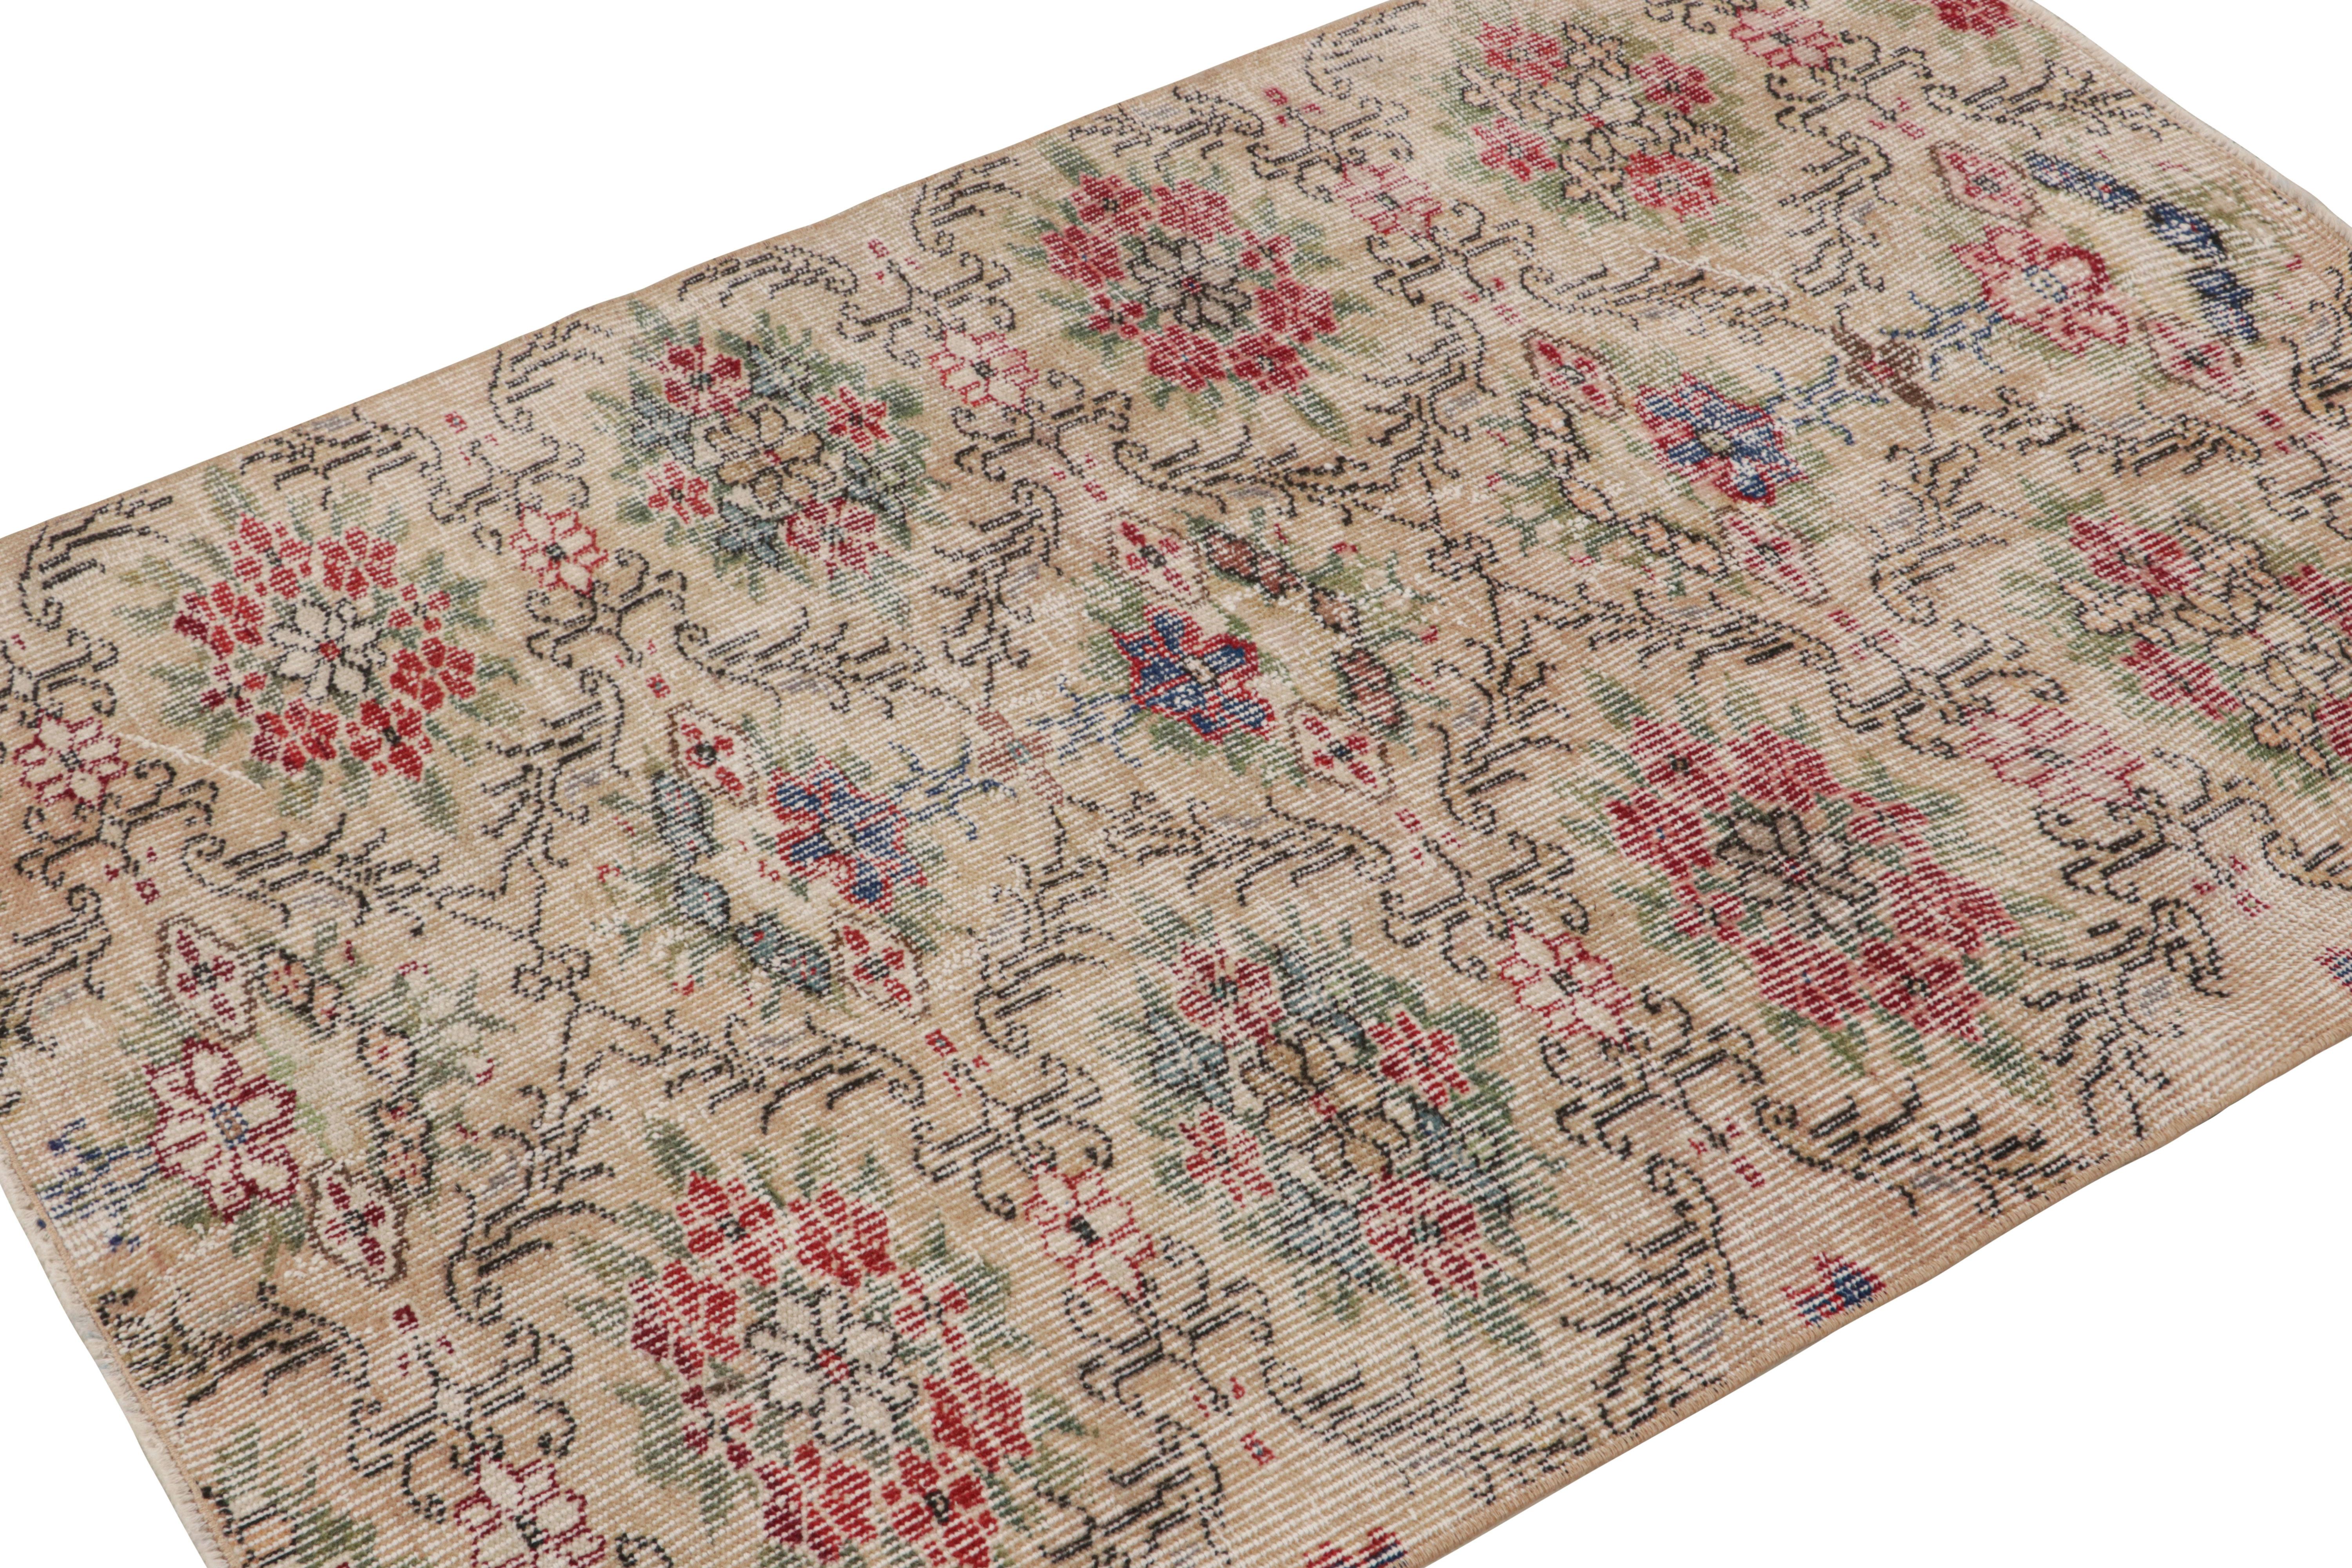 This vintage Zeki Müren 3x4 rug, hand-knotted in wool, circa 1960-1970, features transitional European and Art Deco elements in its design. 

On the Design: 

Connoisseurs will appreciate this design that represents one of Müren’s unique plays of